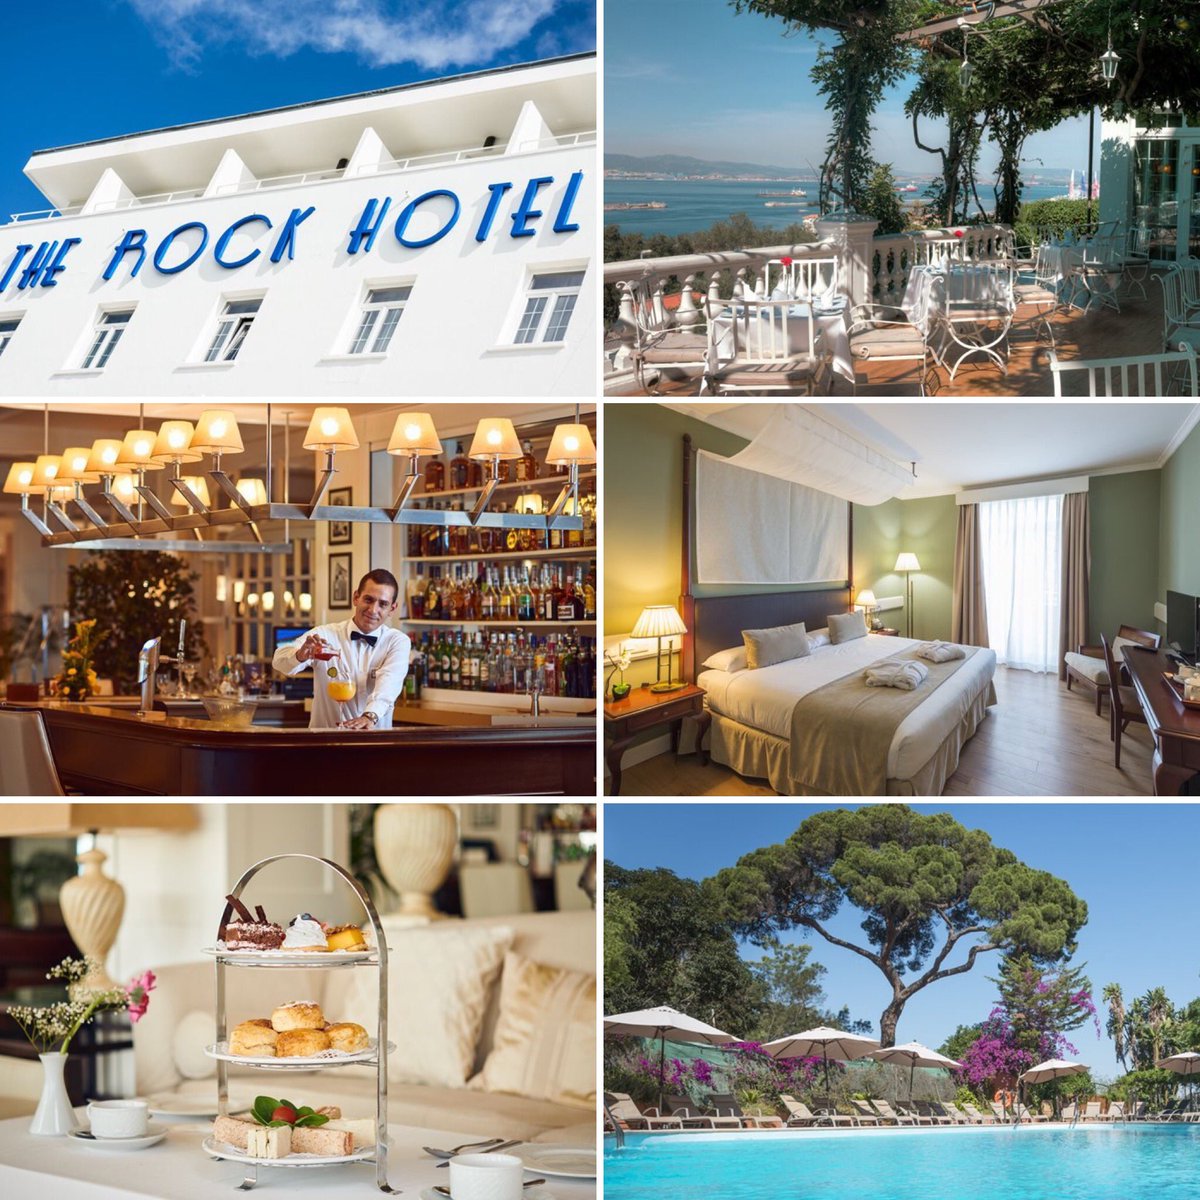 #Wintersun beckons… 

Check The #RockHotelGibraltar’s Autumn/Winter rate offers at  bit.ly/3u5gACs 📞 020 8518 4181 Book flights/hotels/airport transfers ✈️

#gibraltar #mygibraltar #autumnbreak #holiday #rockofgibraltar #shortbreak #greenlist 

📷The Rock Hotel